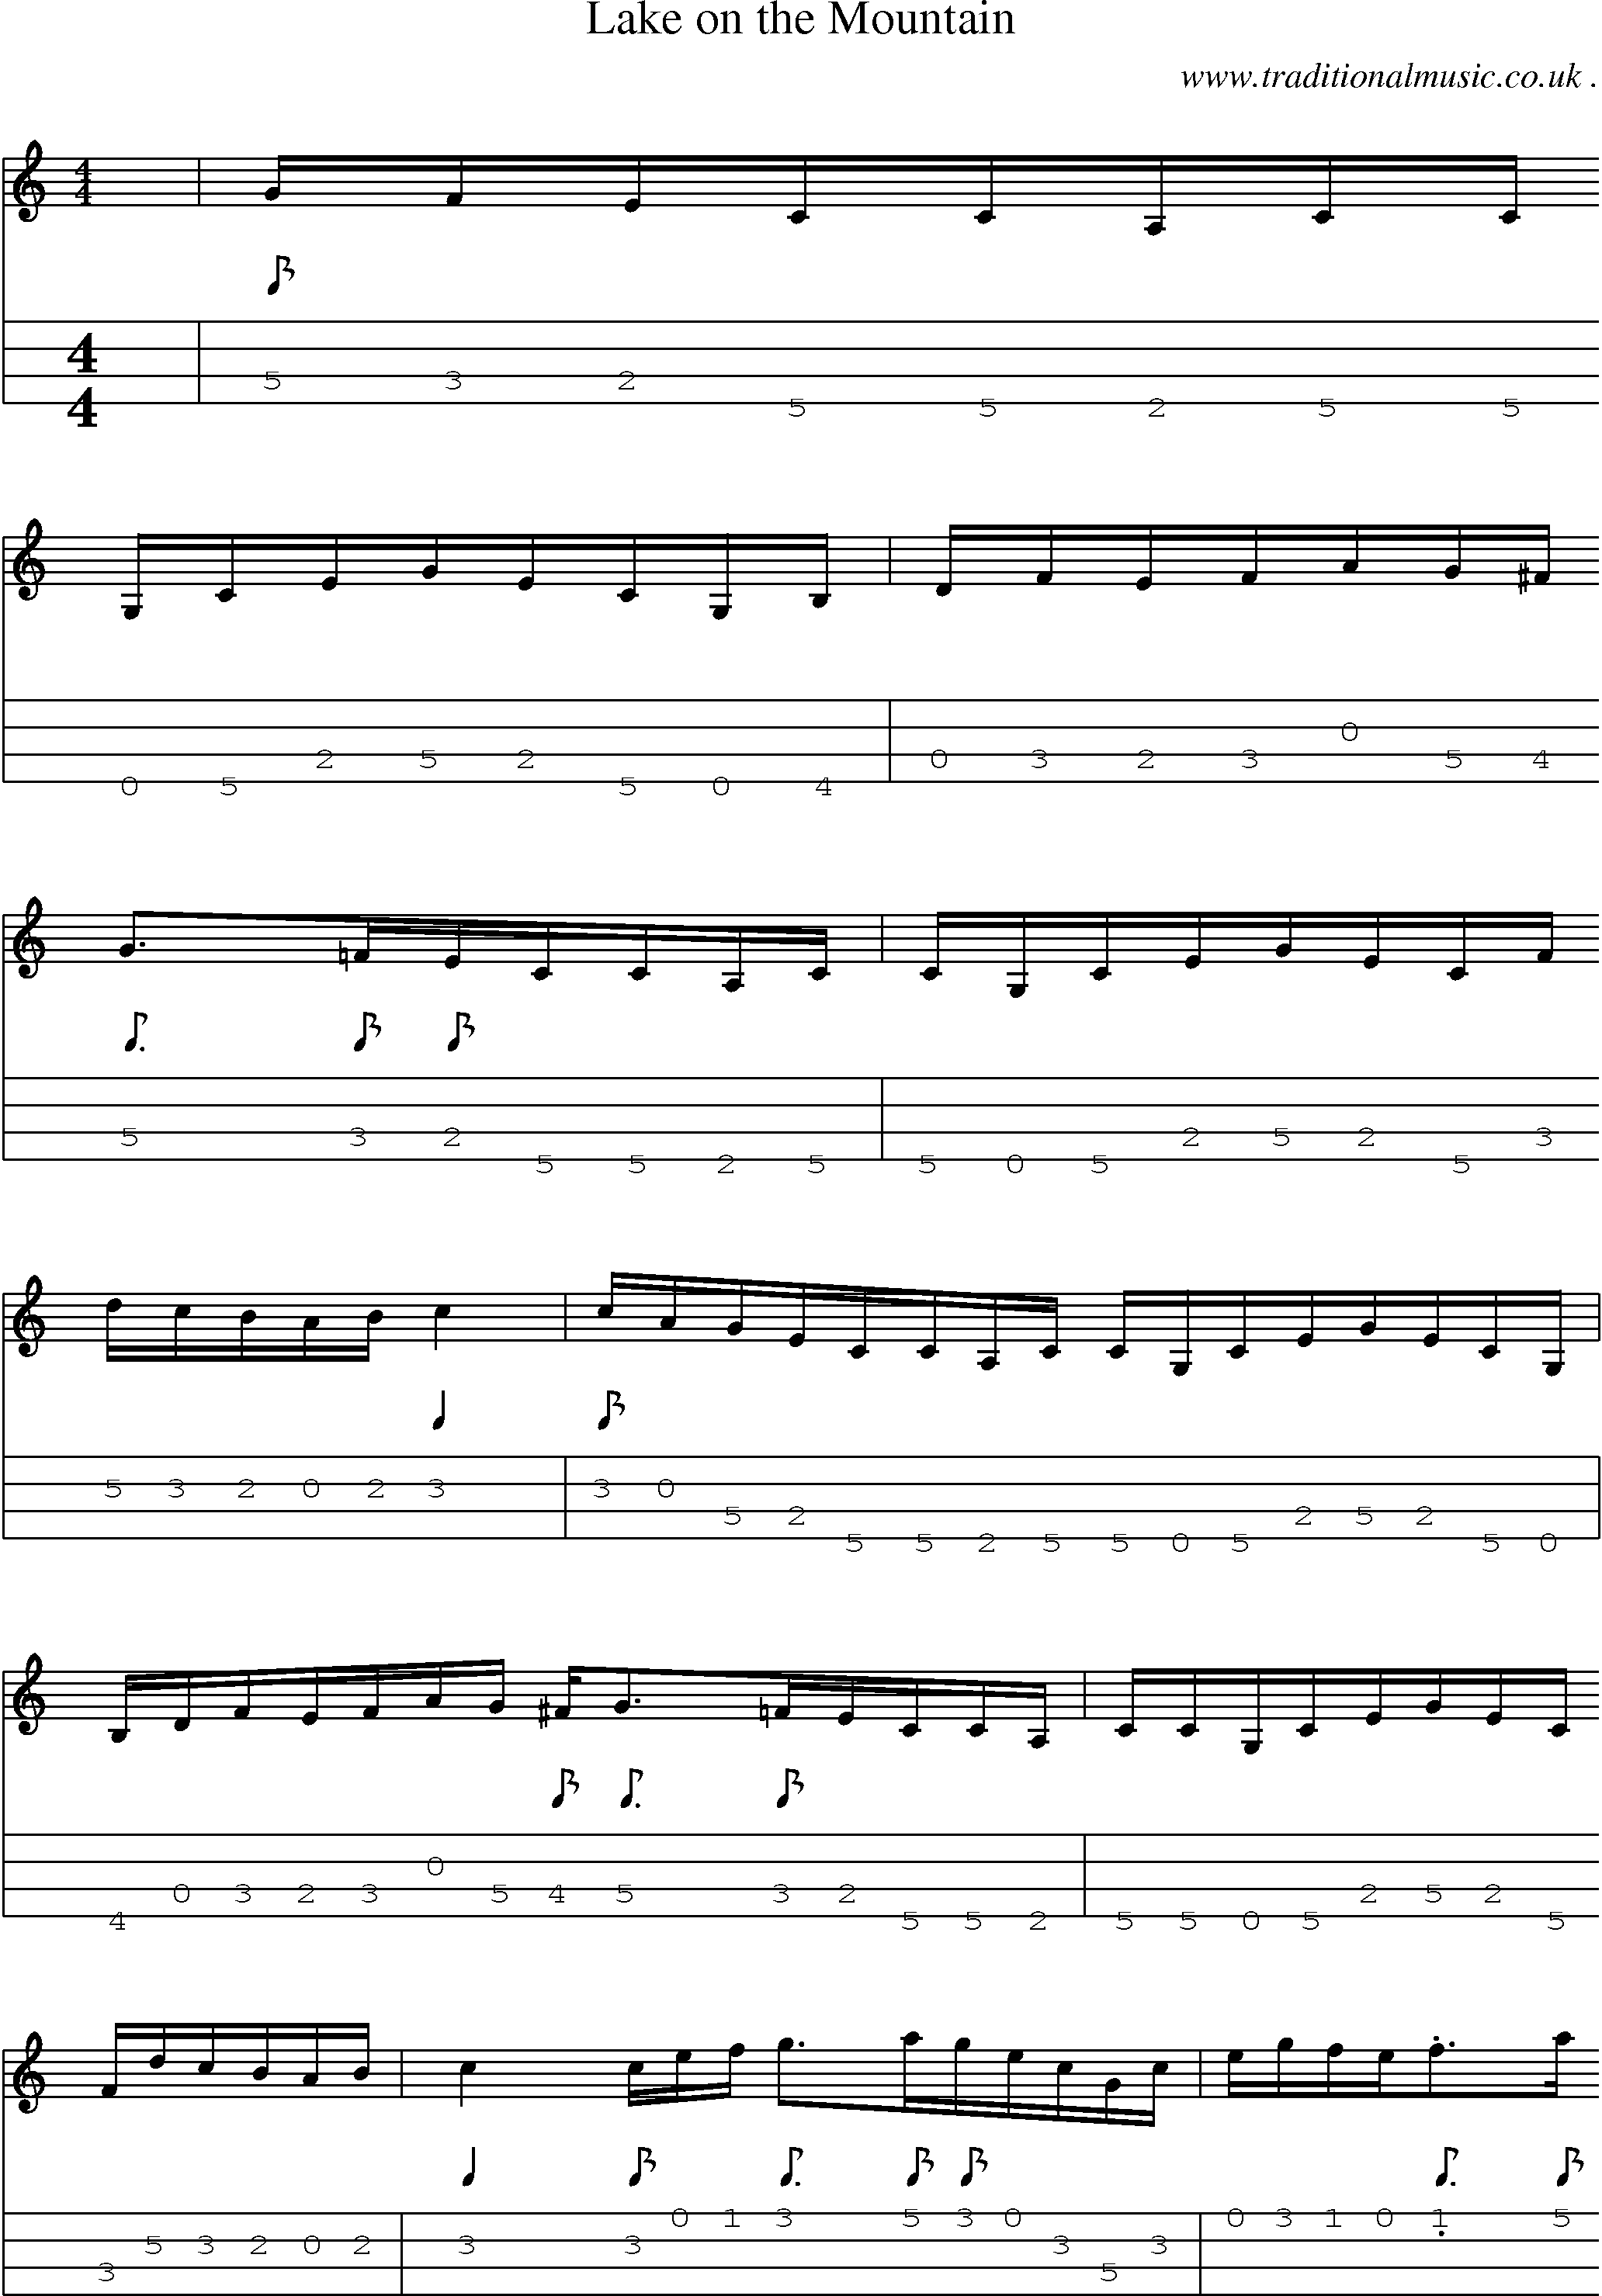 Sheet-music  score, Chords and Mandolin Tabs for Lake On The Mountain